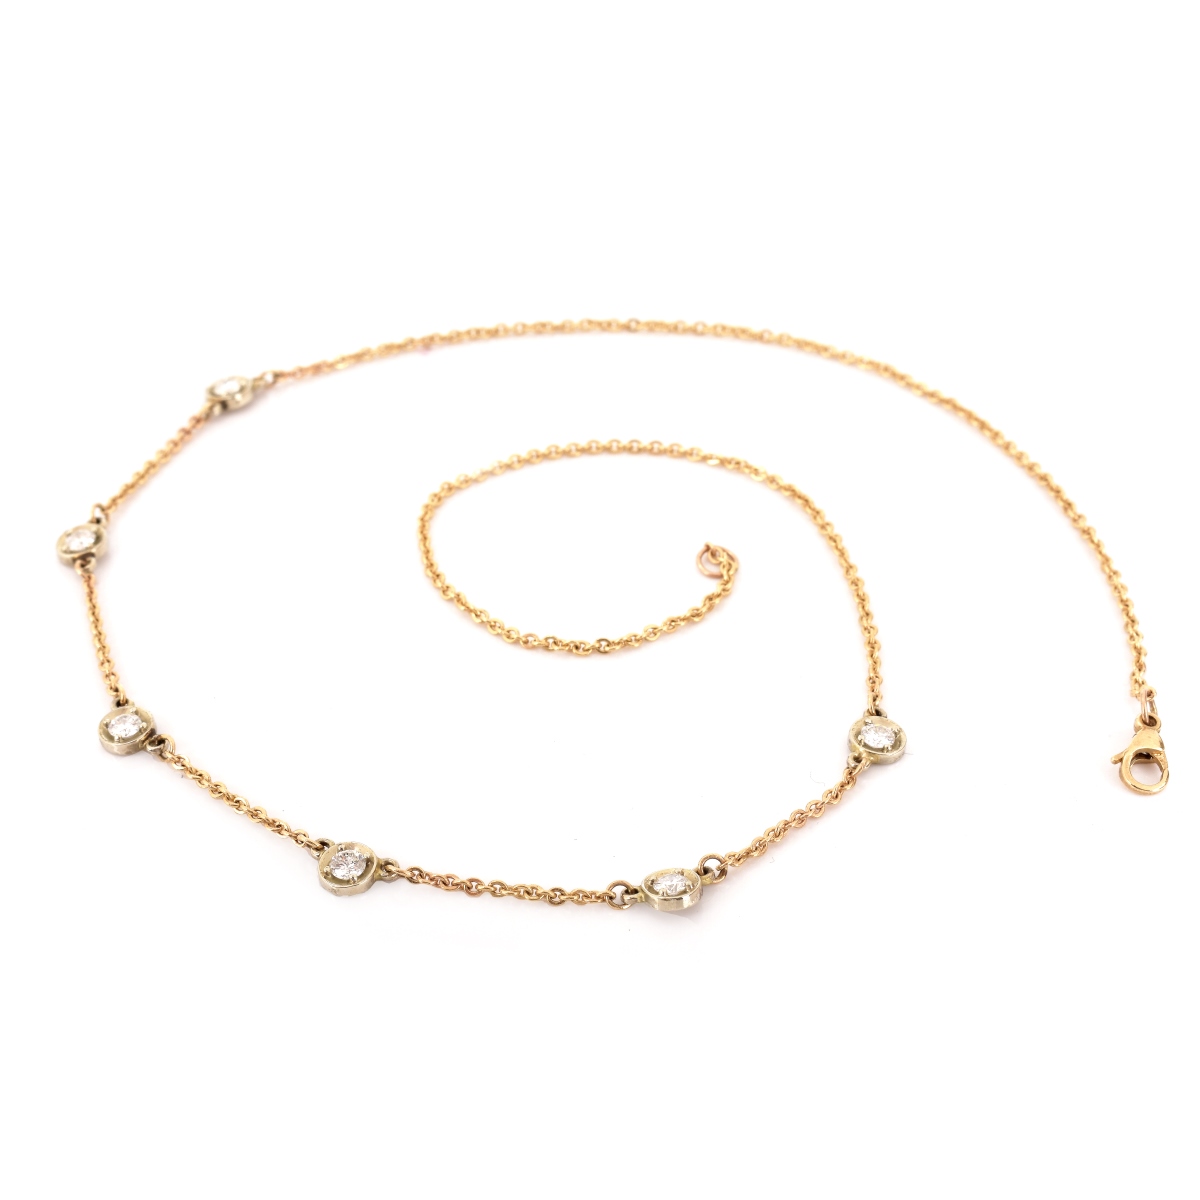 Diamond and 14K Gold Necklace